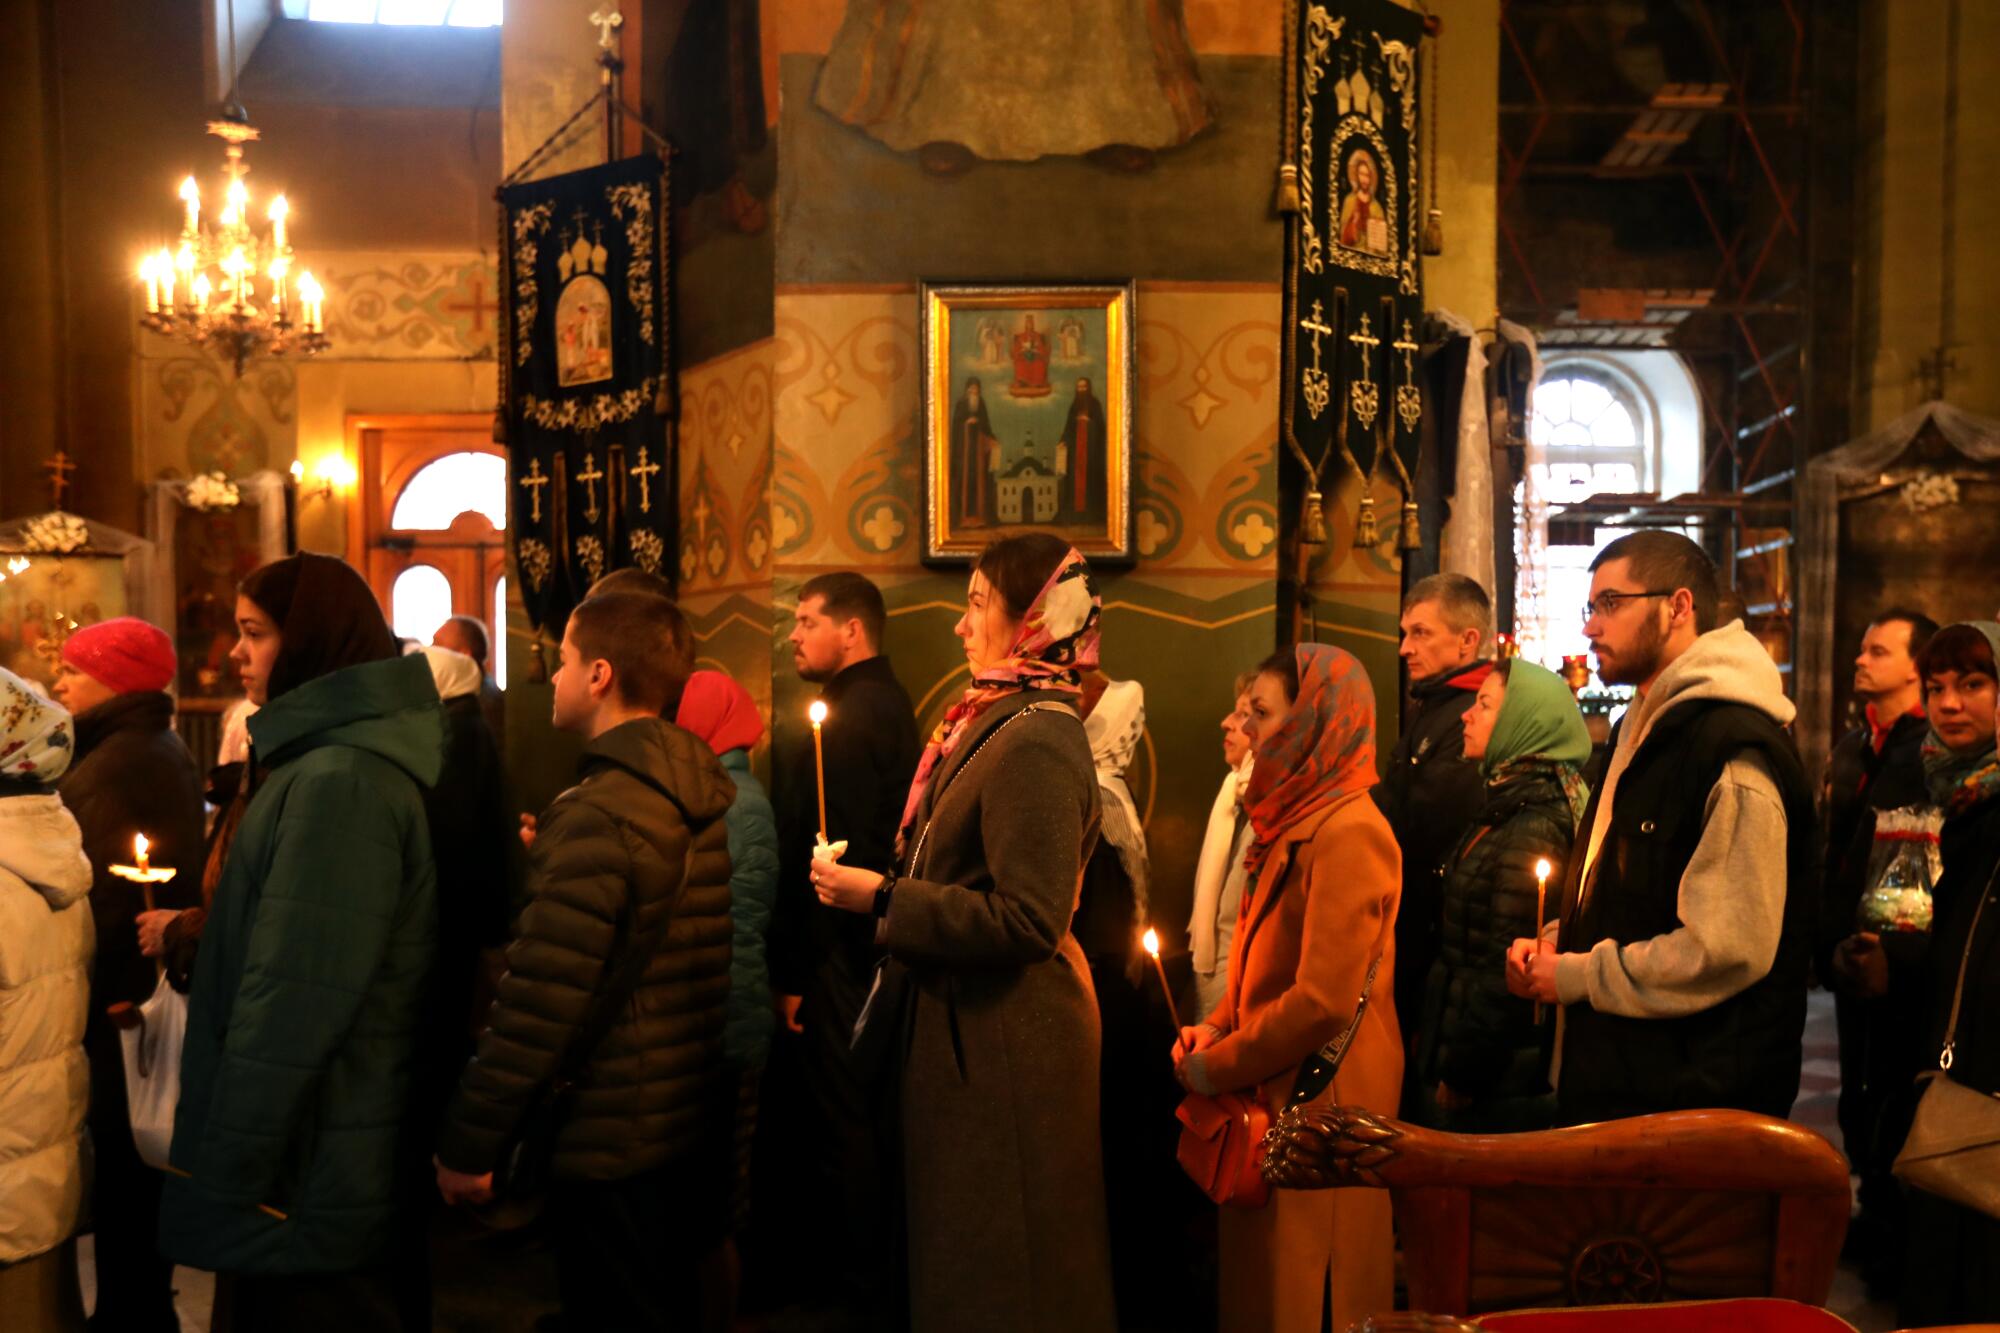 Worshipers gathered at dawn, at the end of curfew, to celebrate Orthodox Christian Easter at Troitska Church